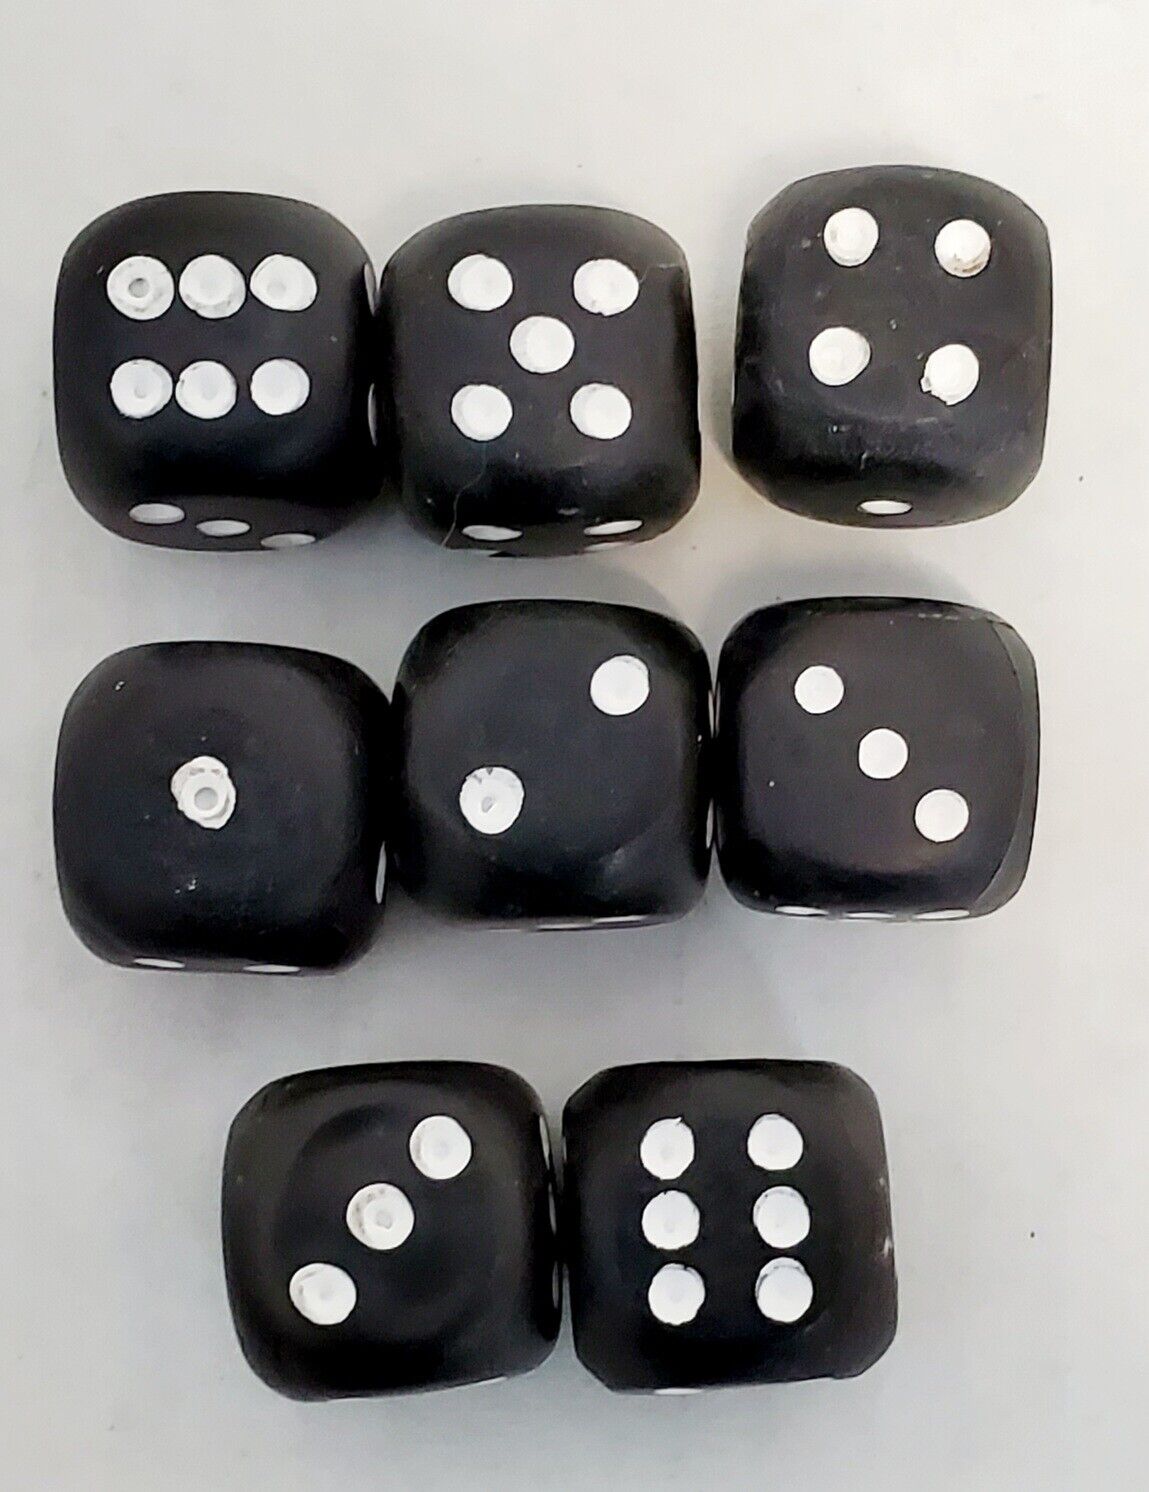 Loaded Dice - Set of 8  Throw The Number You Want With Almost 100% Accuracy